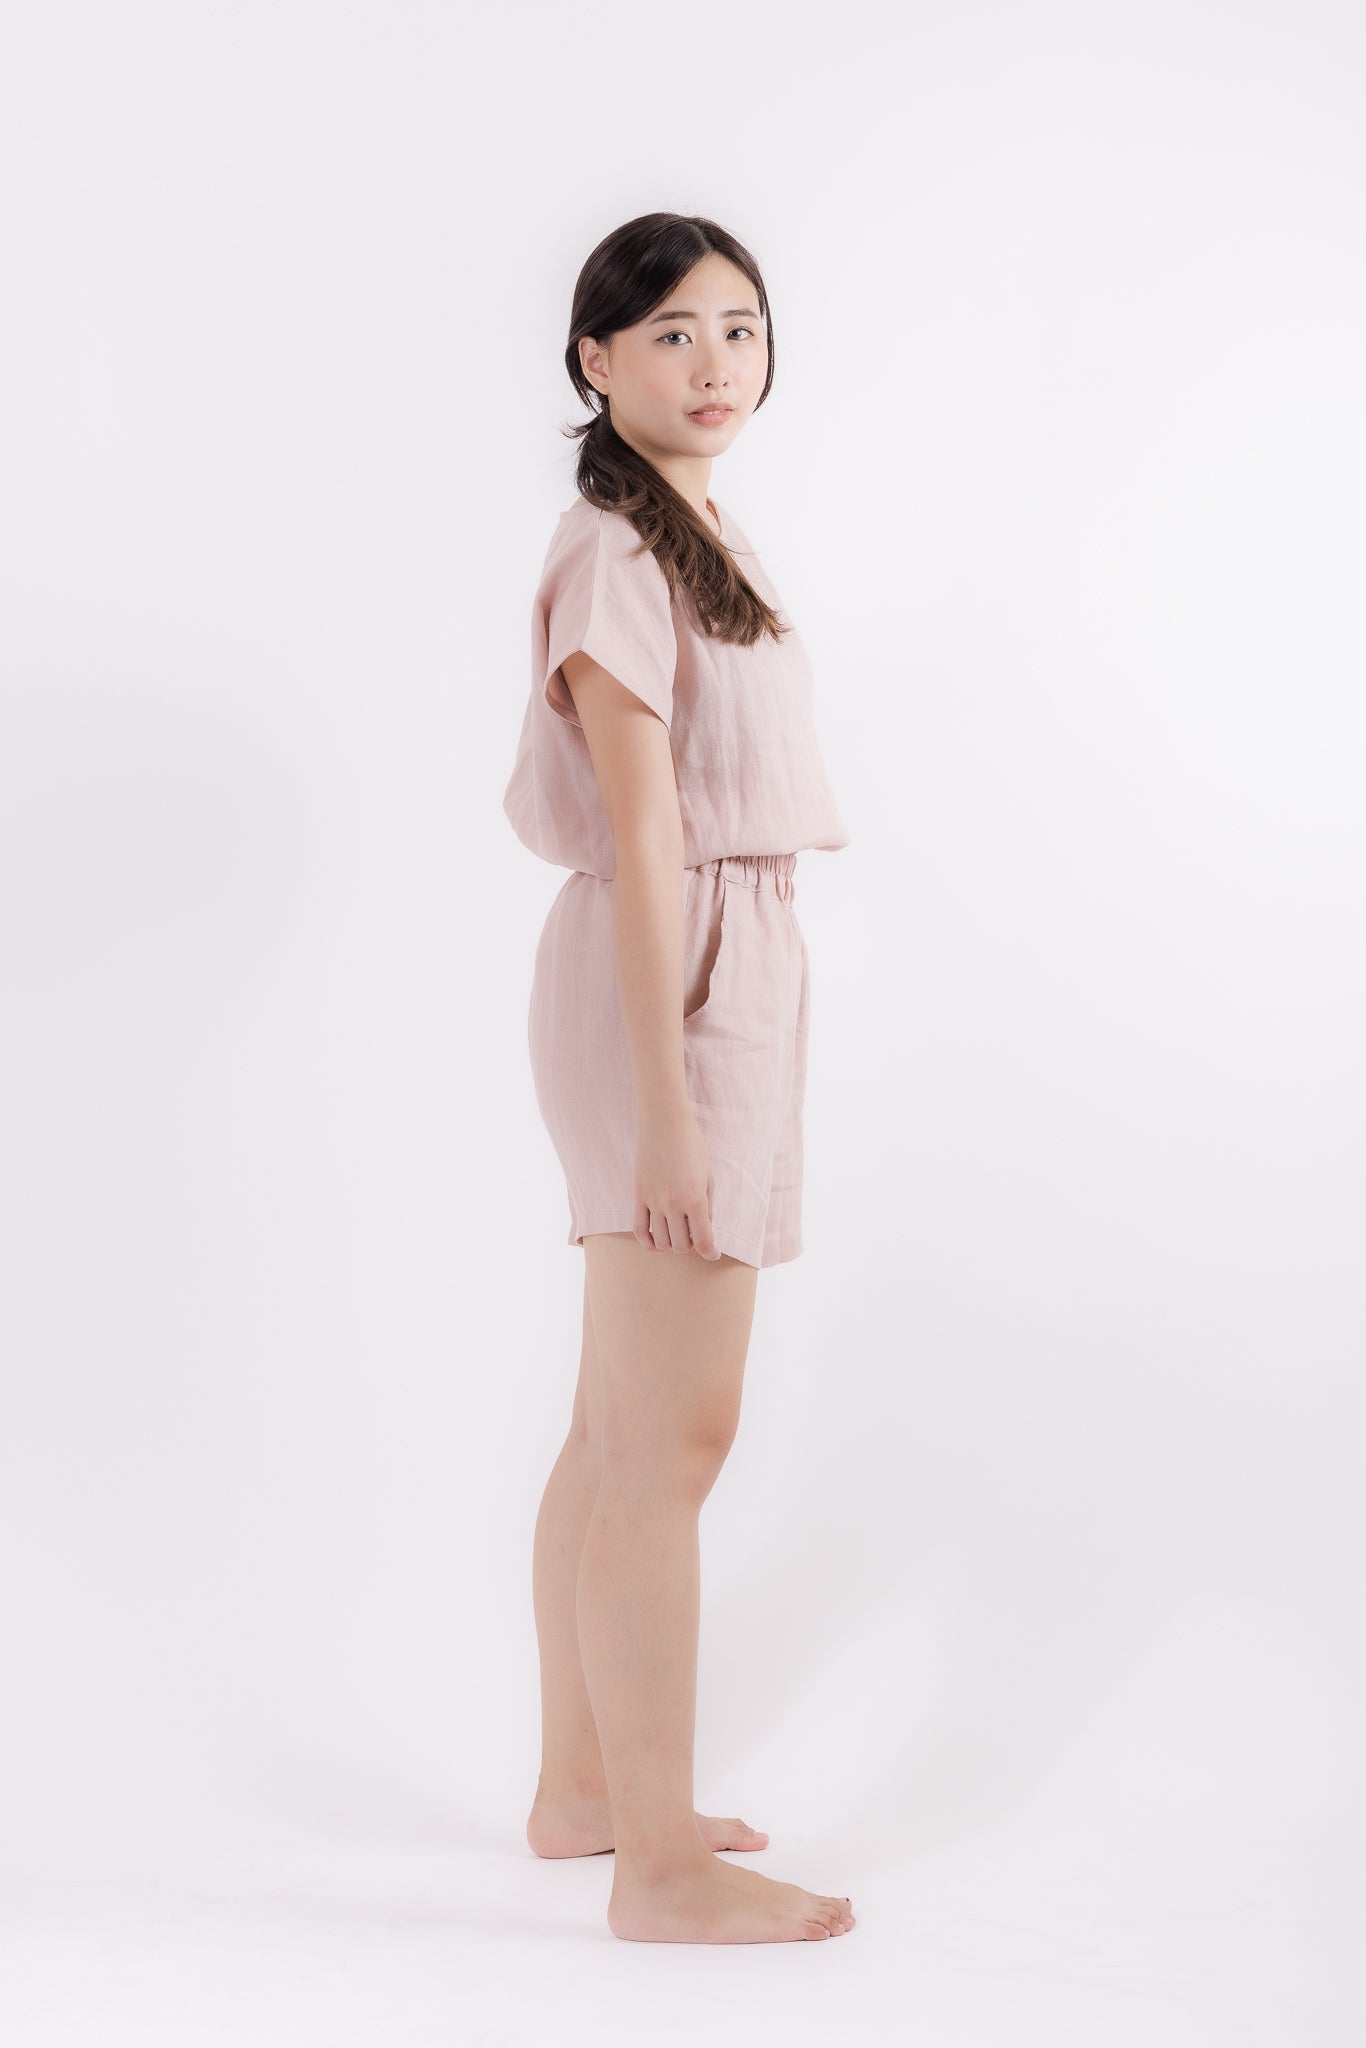 Linen Short Sleeve Top in Dusty Pink by You Living, available online with free Singapore delivery